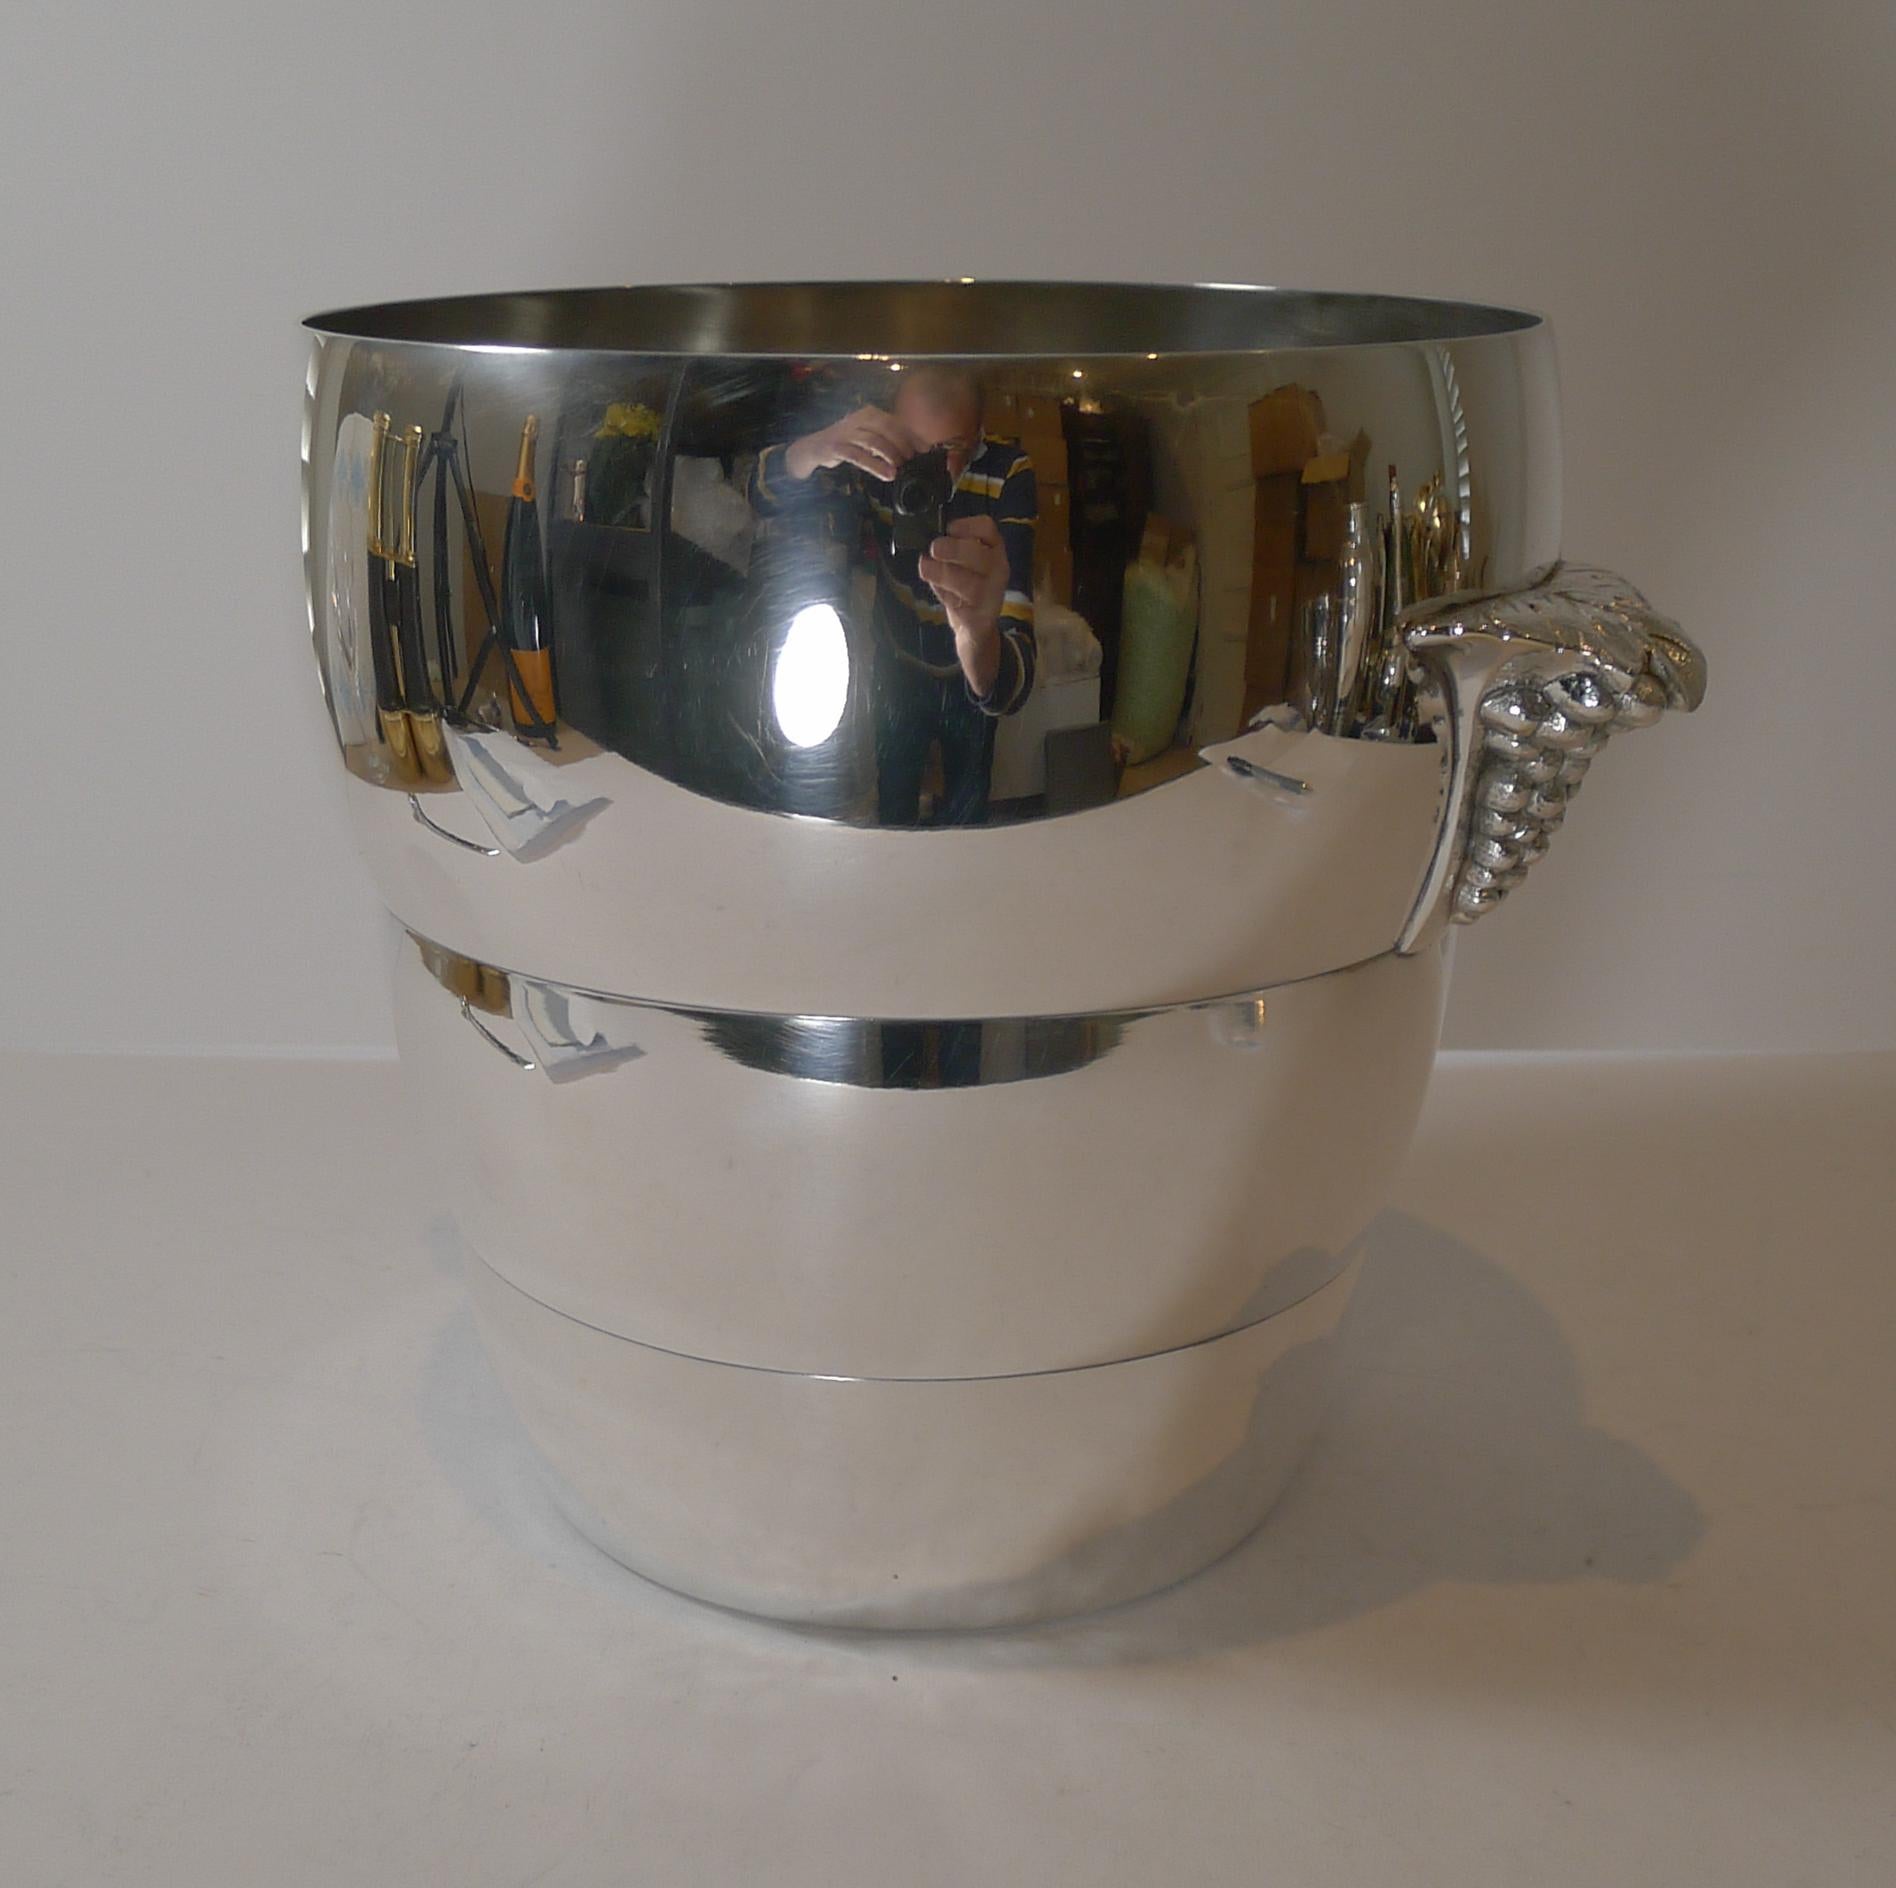 A stunning Art Deco wine cooler / Ice bucket ready to chill the finest of wines and Champagnes. 

Just back from our silversmith's workshop where it has been professionally cleaned and polished, restoring it to it's former glory, dating to the